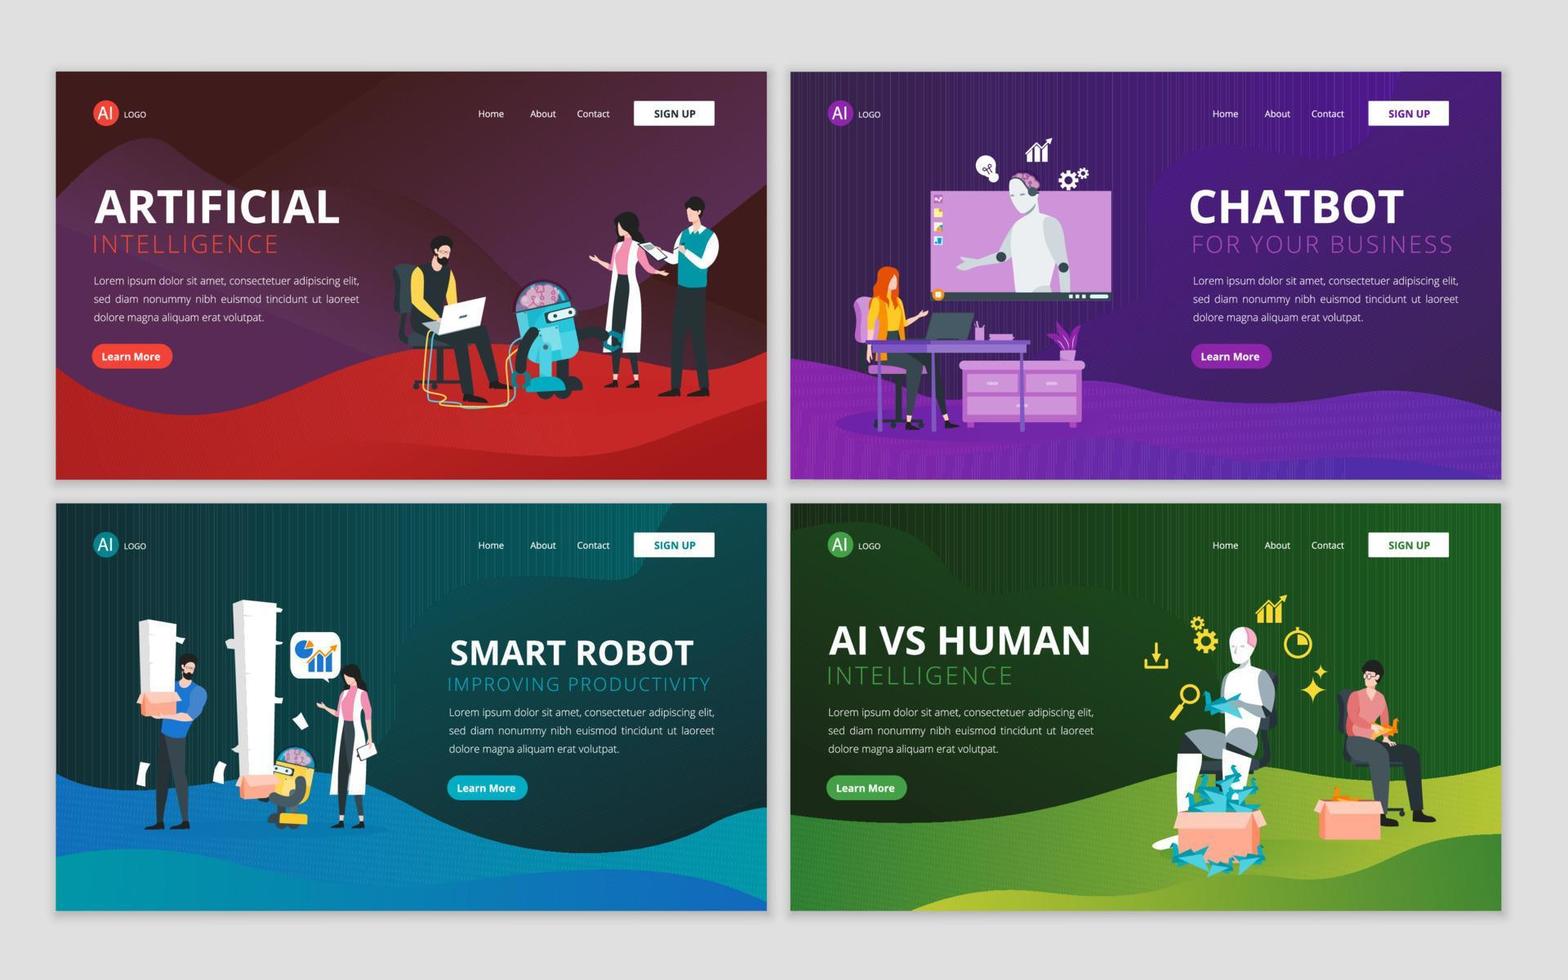 Artificial intelligence AI, robot technology, future technology, machine learning web page design template. Illustration for website and mobile website development vector